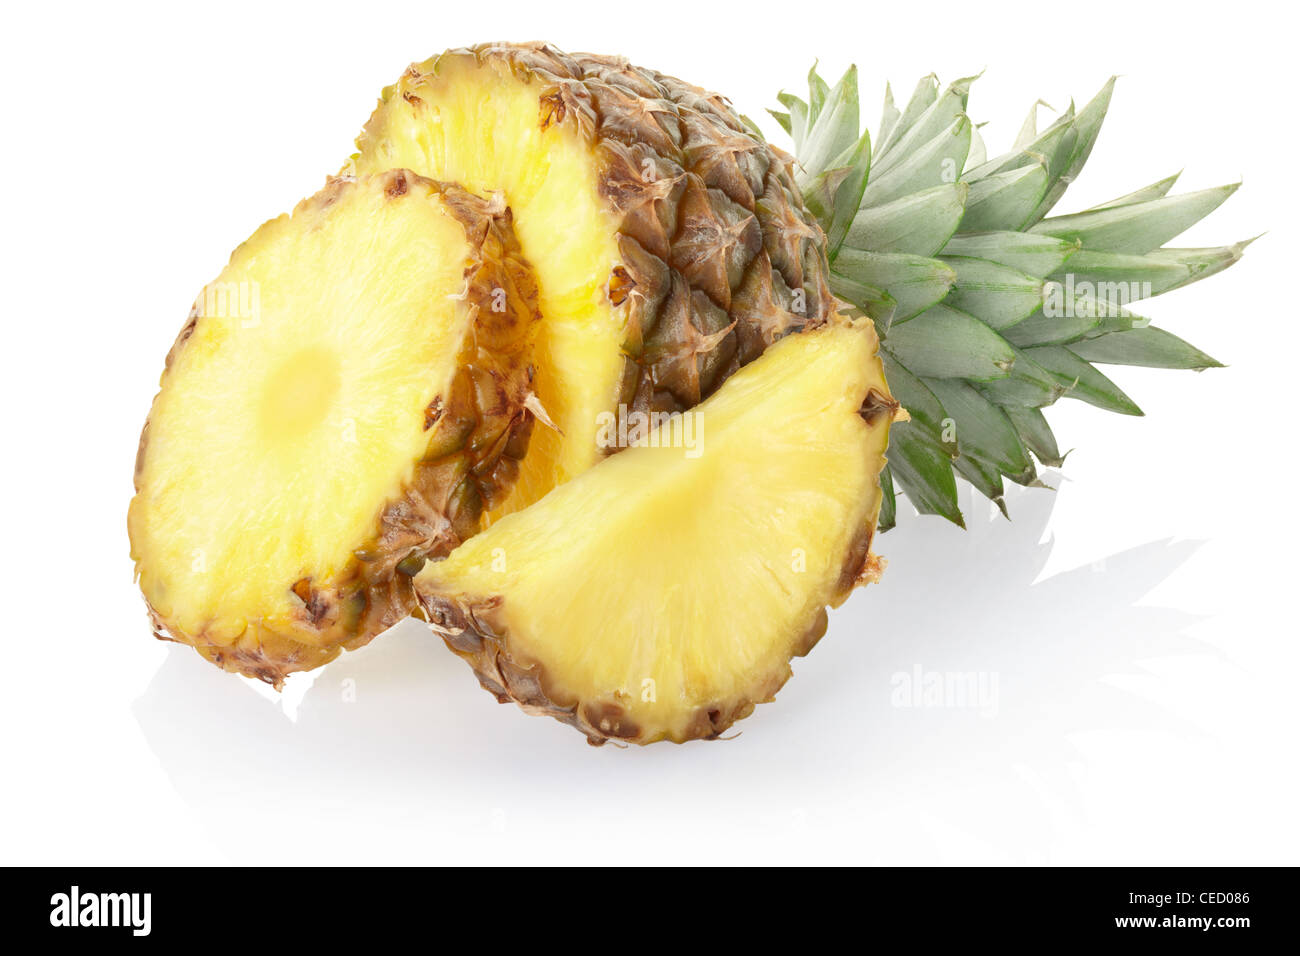 Pineapple and slices Stock Photo